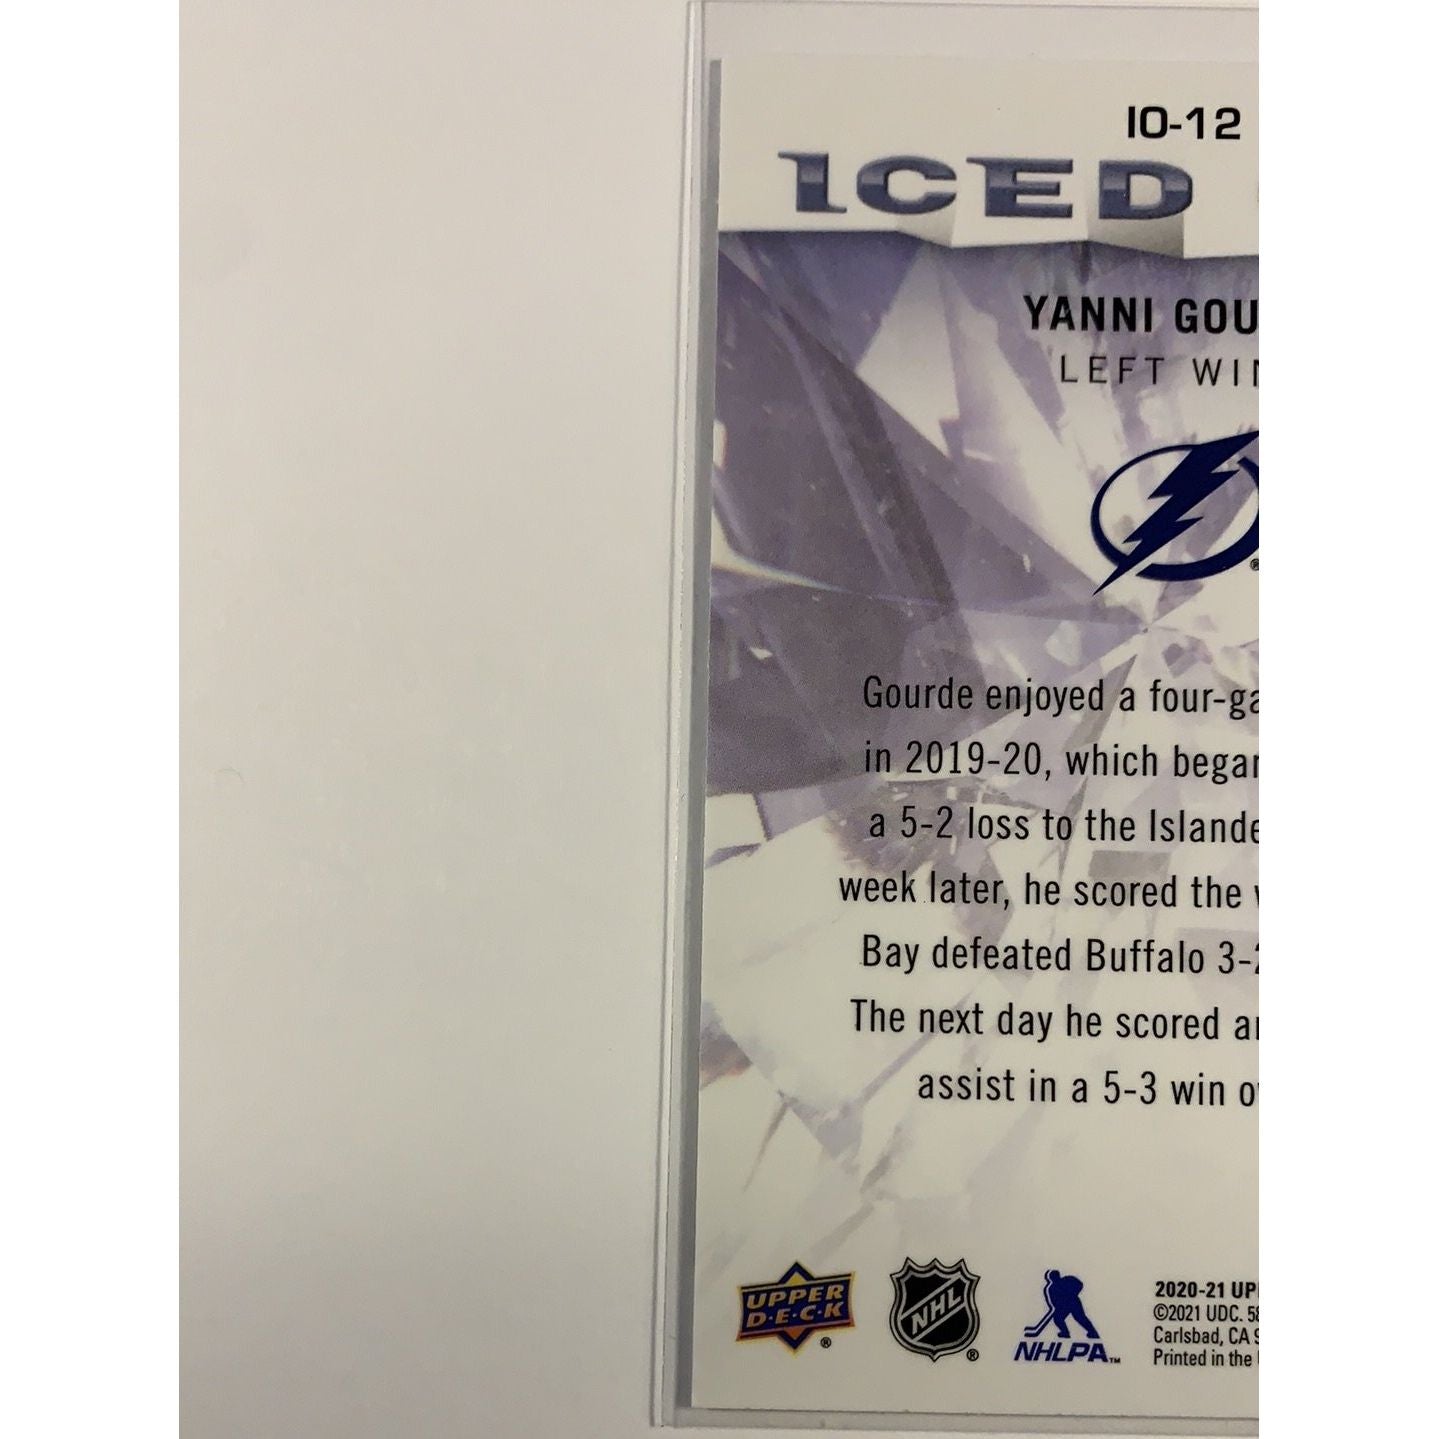  2020-21 Allure Yanni Gourde Iced Out  Local Legends Cards & Collectibles